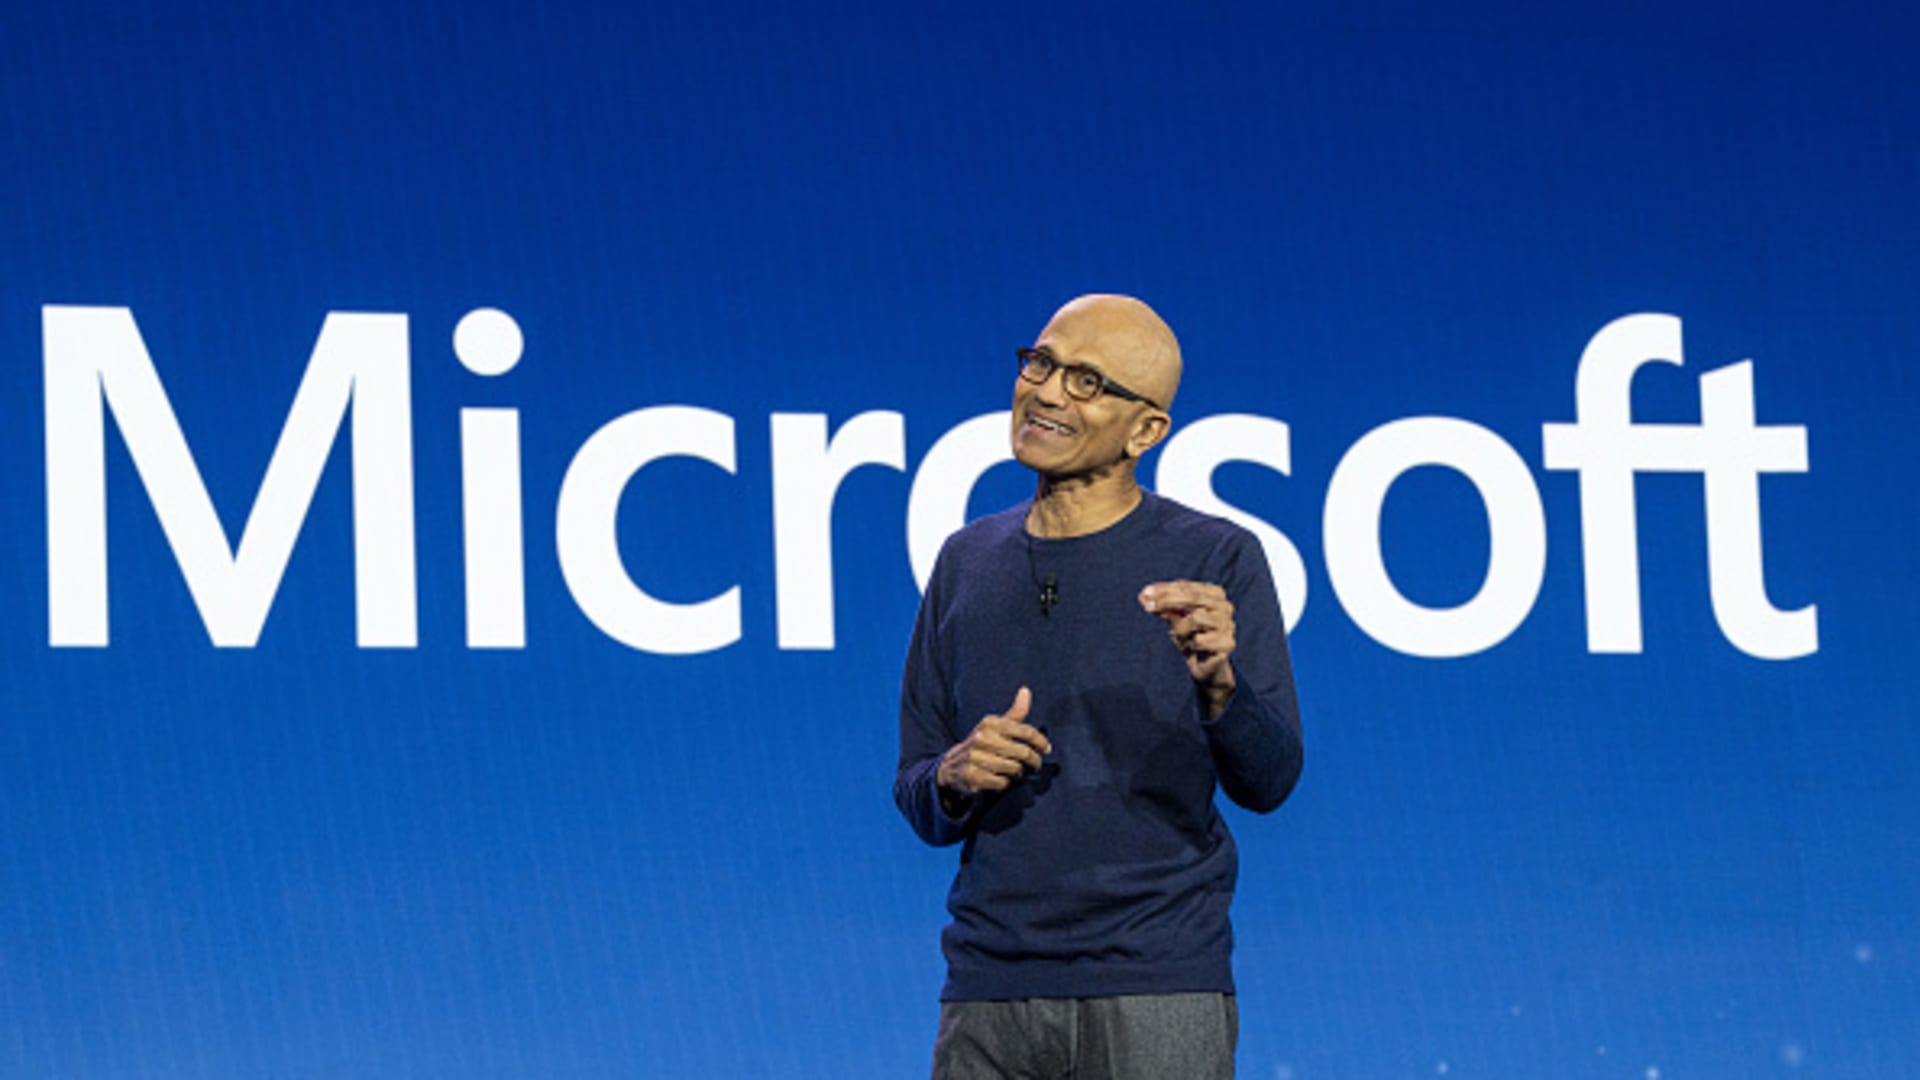 Microsoft gets a price target hike after posting a great quarter driven by AI